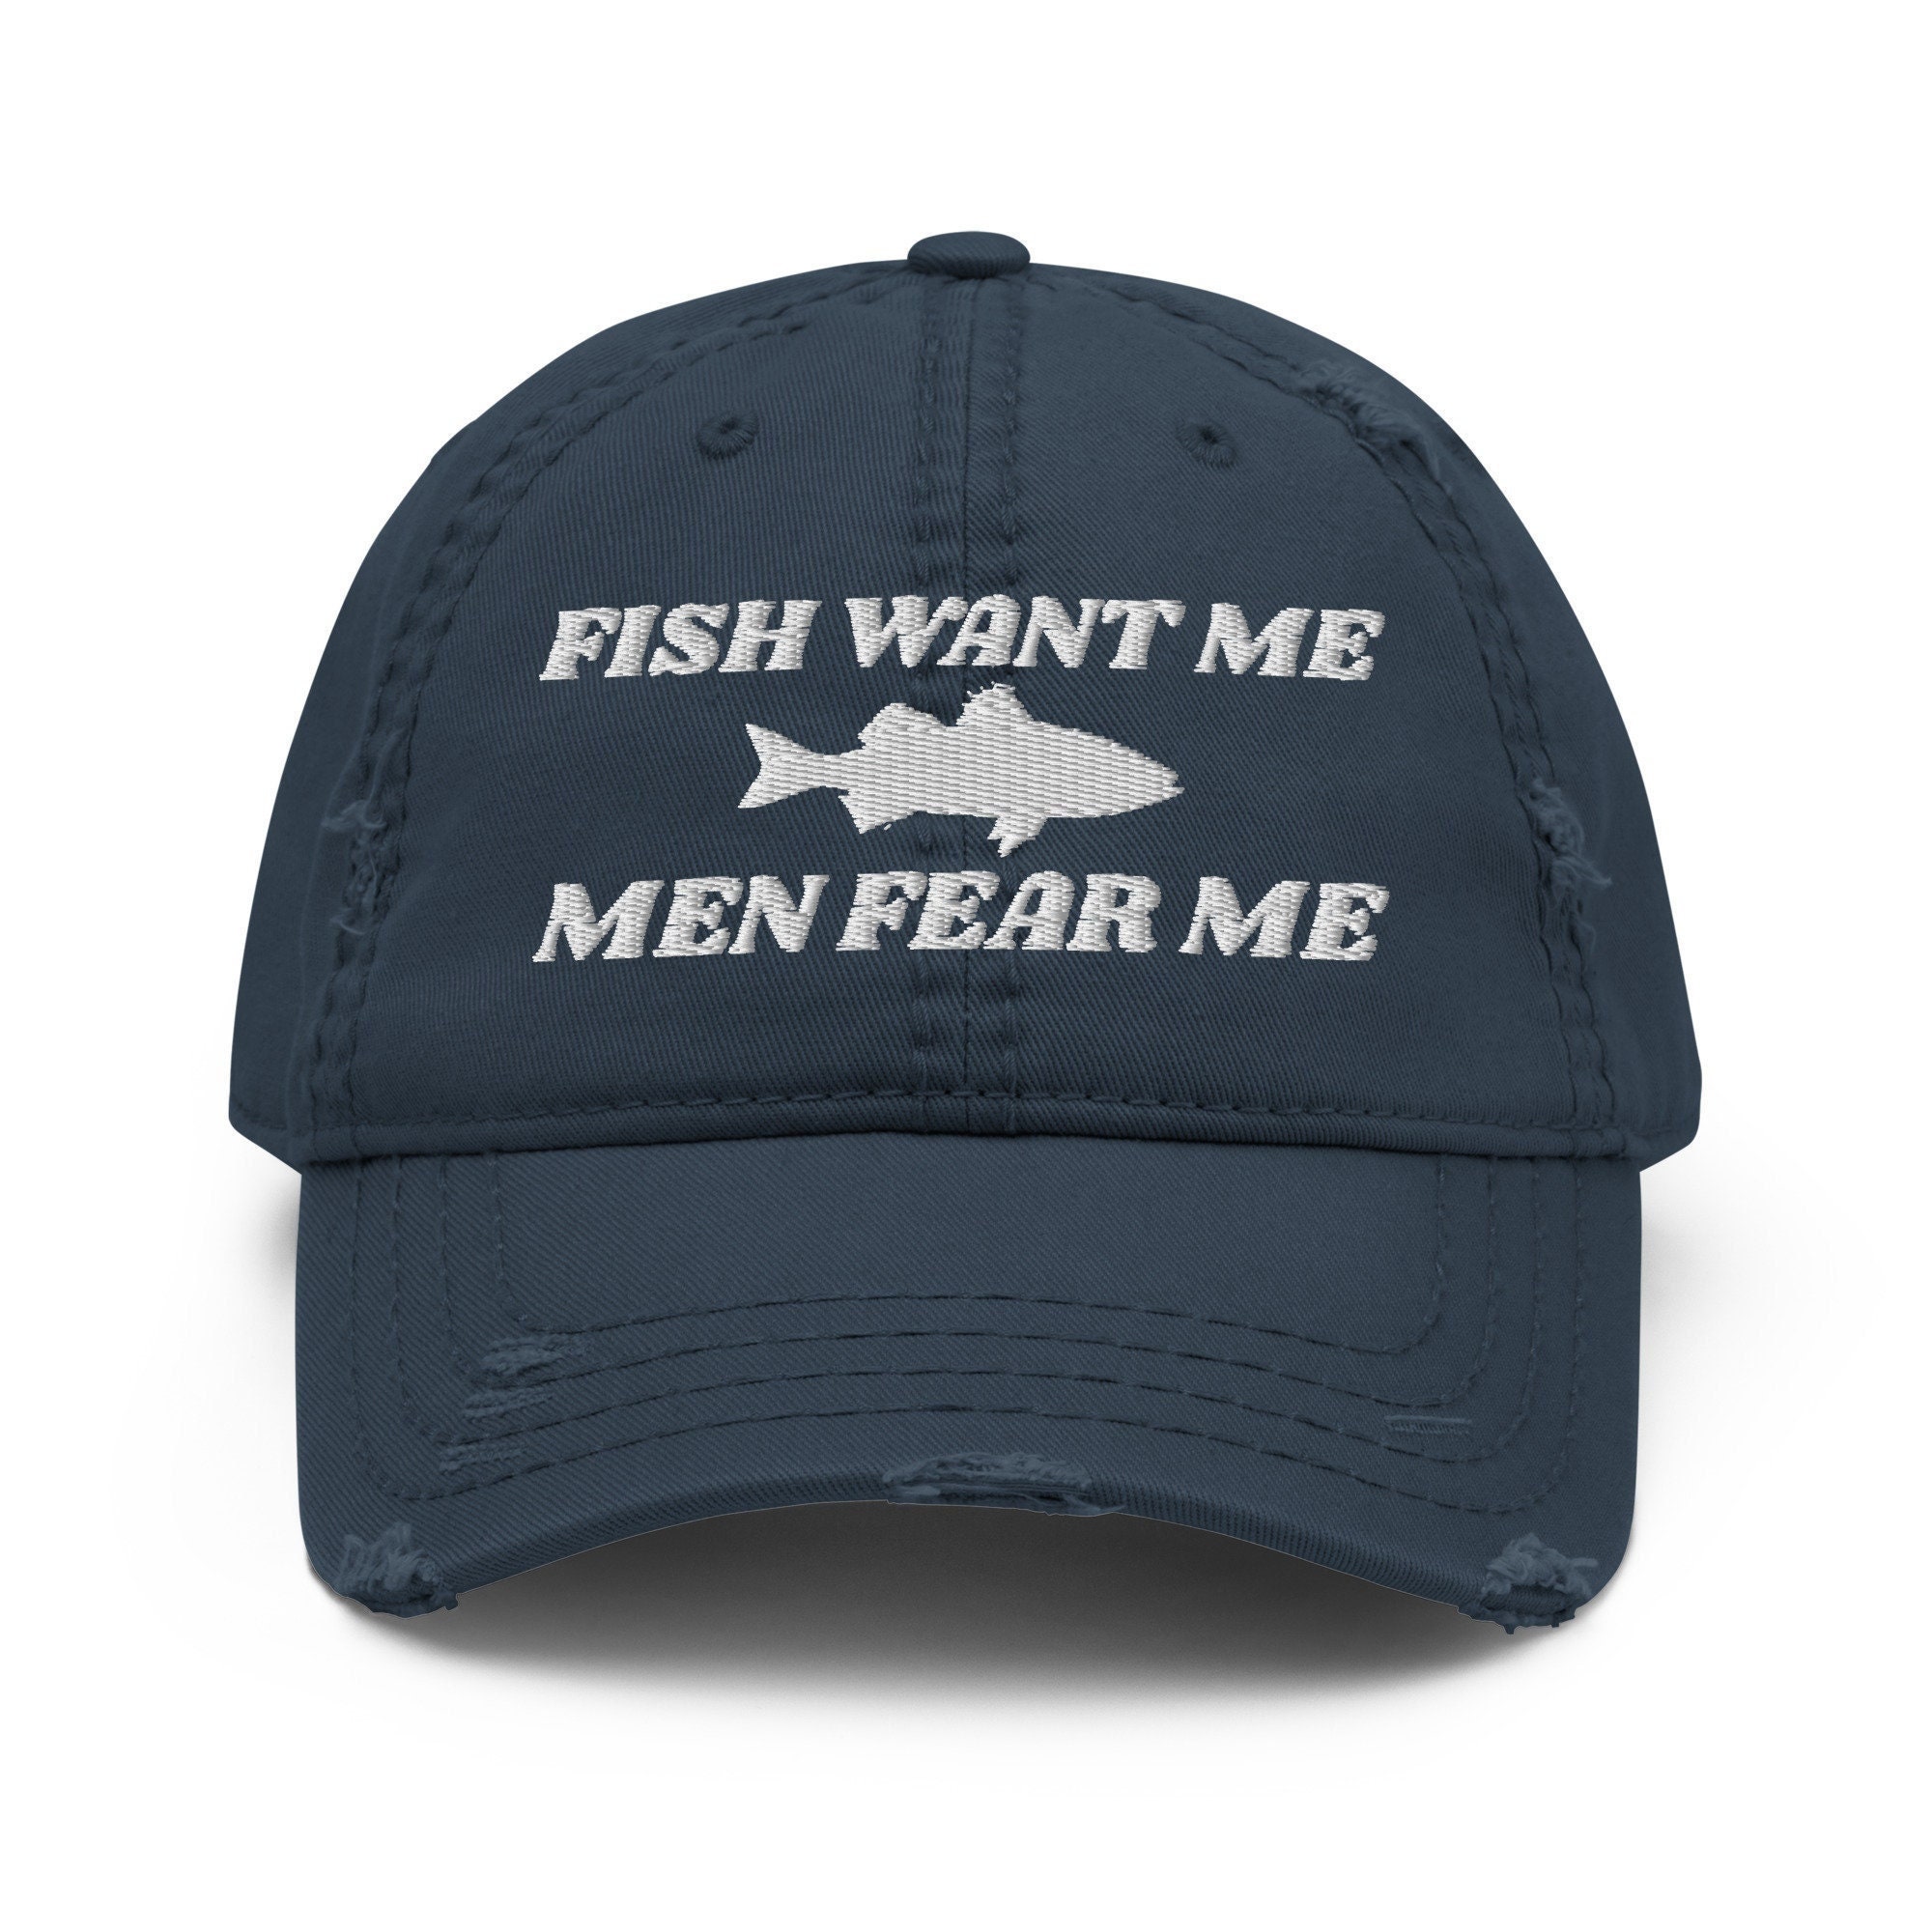 Fish Want Me - Men Fear Me - Embroidered Funny Fishing Lovers Distressed Dad Hat Cap, Gift For Fishing Lovers, Meme Hat, Funny Hat Cap Gift